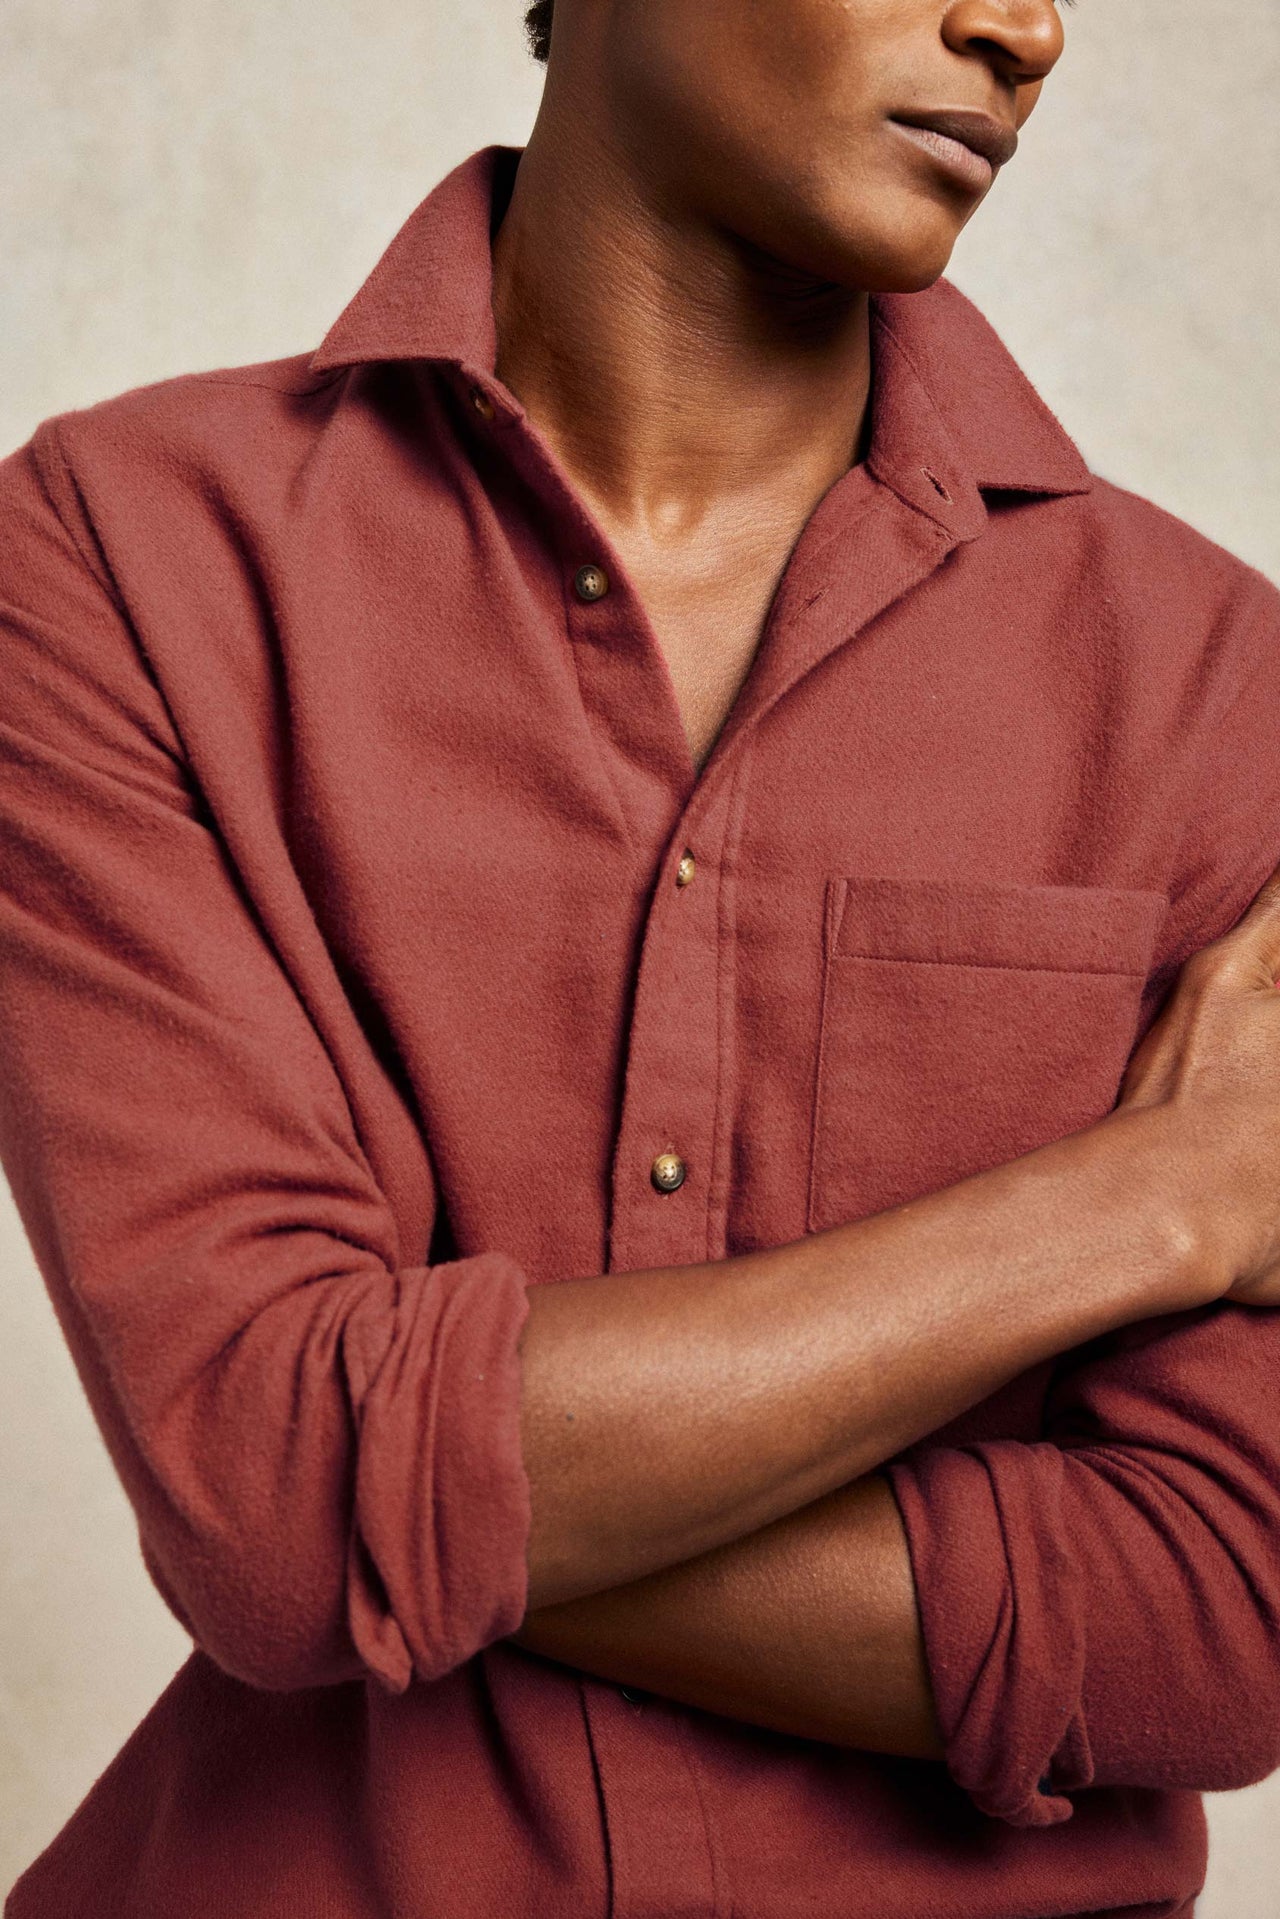 Brushed cotton rust red men’s twill shirt with a classic collar. 100% Cotton. Smart casual wear. Soft touch material. Made in Portugal. Machine wash. Size S,M,L,XL,XXL.